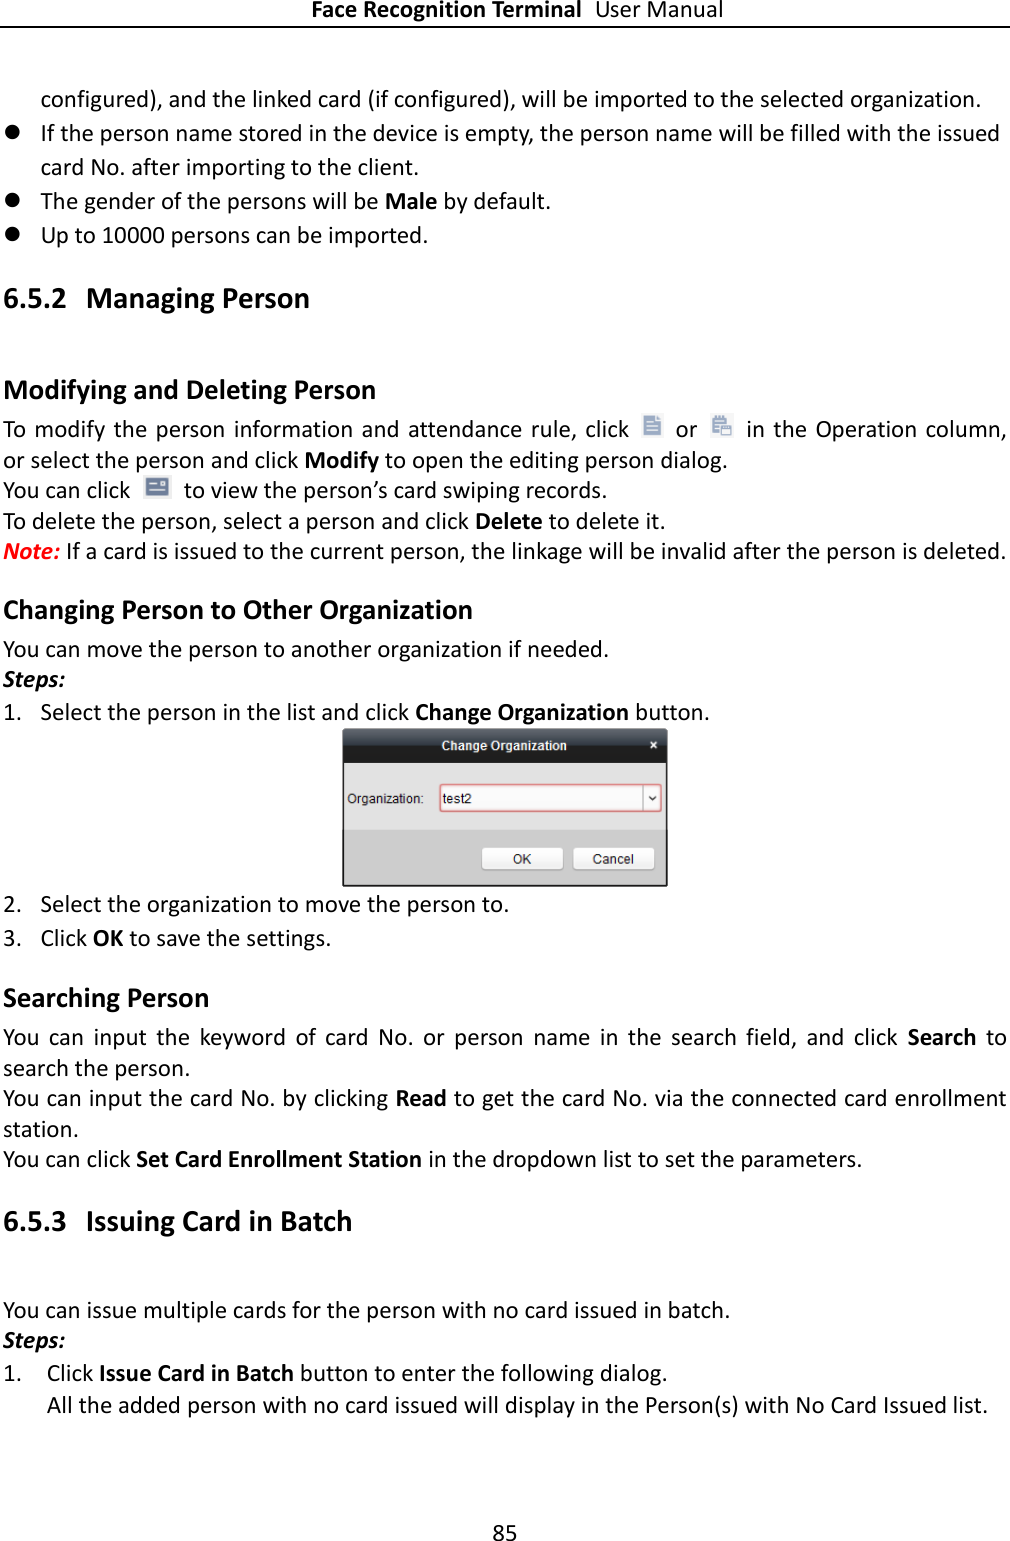 Face Recognition Terminal User Manual 85  configured), and the linked card (if configured), will be imported to the selected organization.  If the person name stored in the device is empty, the person name will be filled with the issued card No. after importing to the client.  The gender of the persons will be Male by default.  Up to 10000 persons can be imported. 6.5.2 Managing Person Modifying and Deleting Person To  modify the person information and  attendance rule, click    or    in the Operation column, or select the person and click Modify to open the editing person dialog. You can click    to view the person’s card swiping records. To delete the person, select a person and click Delete to delete it. Note: If a card is issued to the current person, the linkage will be invalid after the person is deleted. Changing Person to Other Organization You can move the person to another organization if needed. Steps: 1. Select the person in the list and click Change Organization button.  2. Select the organization to move the person to. 3. Click OK to save the settings. Searching Person You  can  input  the  keyword  of  card  No.  or  person  name  in  the  search  field,  and  click  Search  to search the person. You can input the card No. by clicking Read to get the card No. via the connected card enrollment station. You can click Set Card Enrollment Station in the dropdown list to set the parameters. 6.5.3 Issuing Card in Batch You can issue multiple cards for the person with no card issued in batch. Steps: 1. Click Issue Card in Batch button to enter the following dialog. All the added person with no card issued will display in the Person(s) with No Card Issued list. 